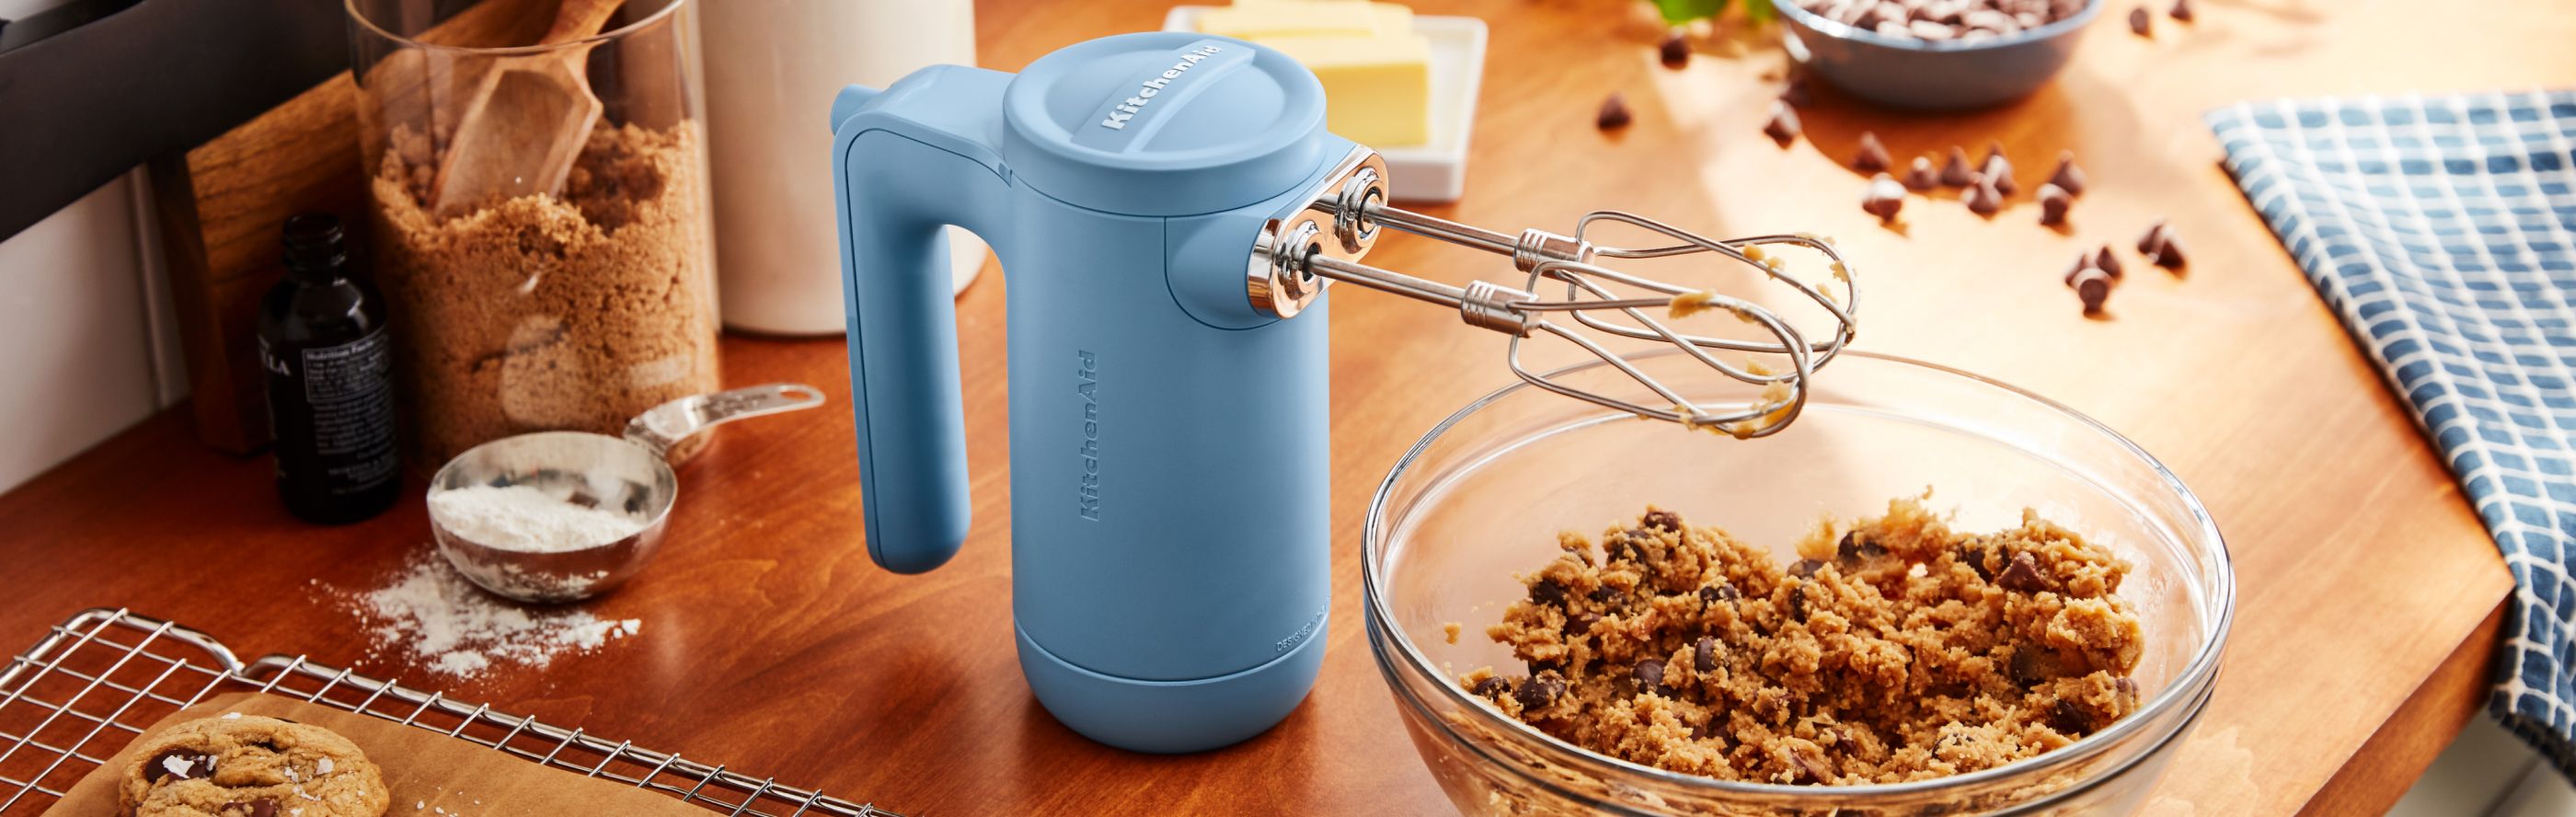 Cordless KitchenAid® hand mixer next to cookie dough and fresh baked chocolate chip cookies.